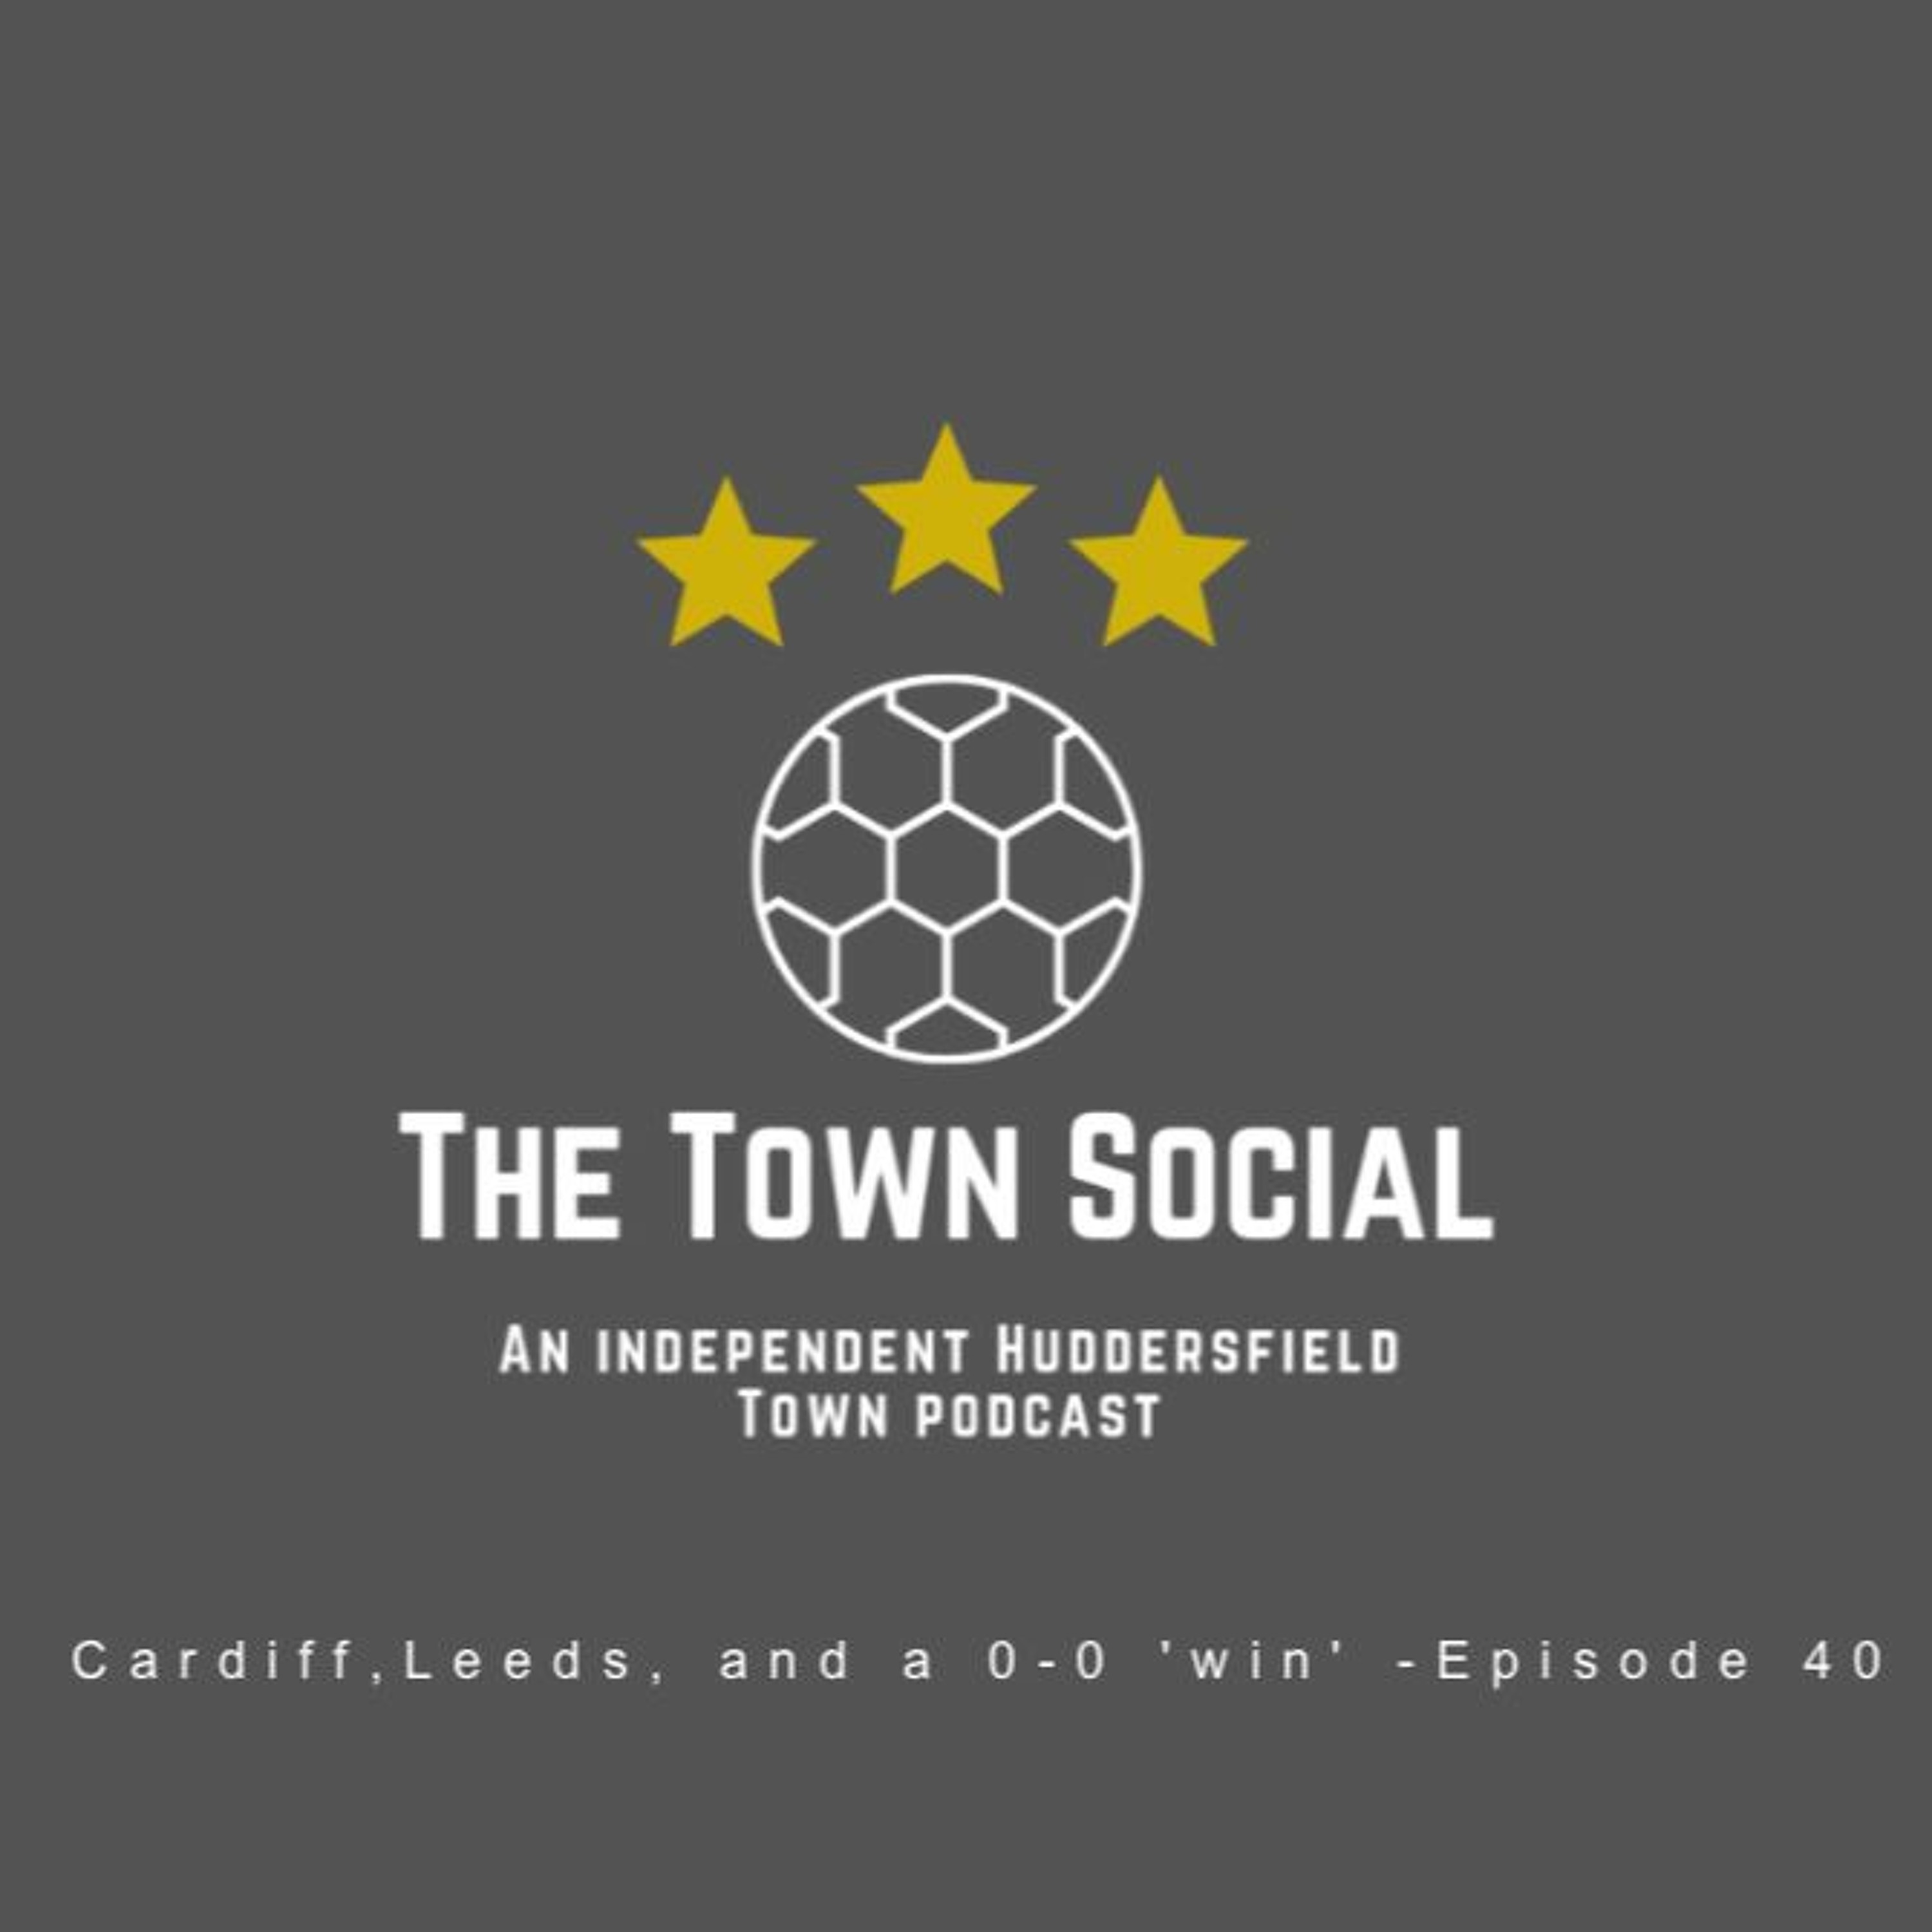 Cardiff, Leeds, & a 0-0 'win' - Episode 40